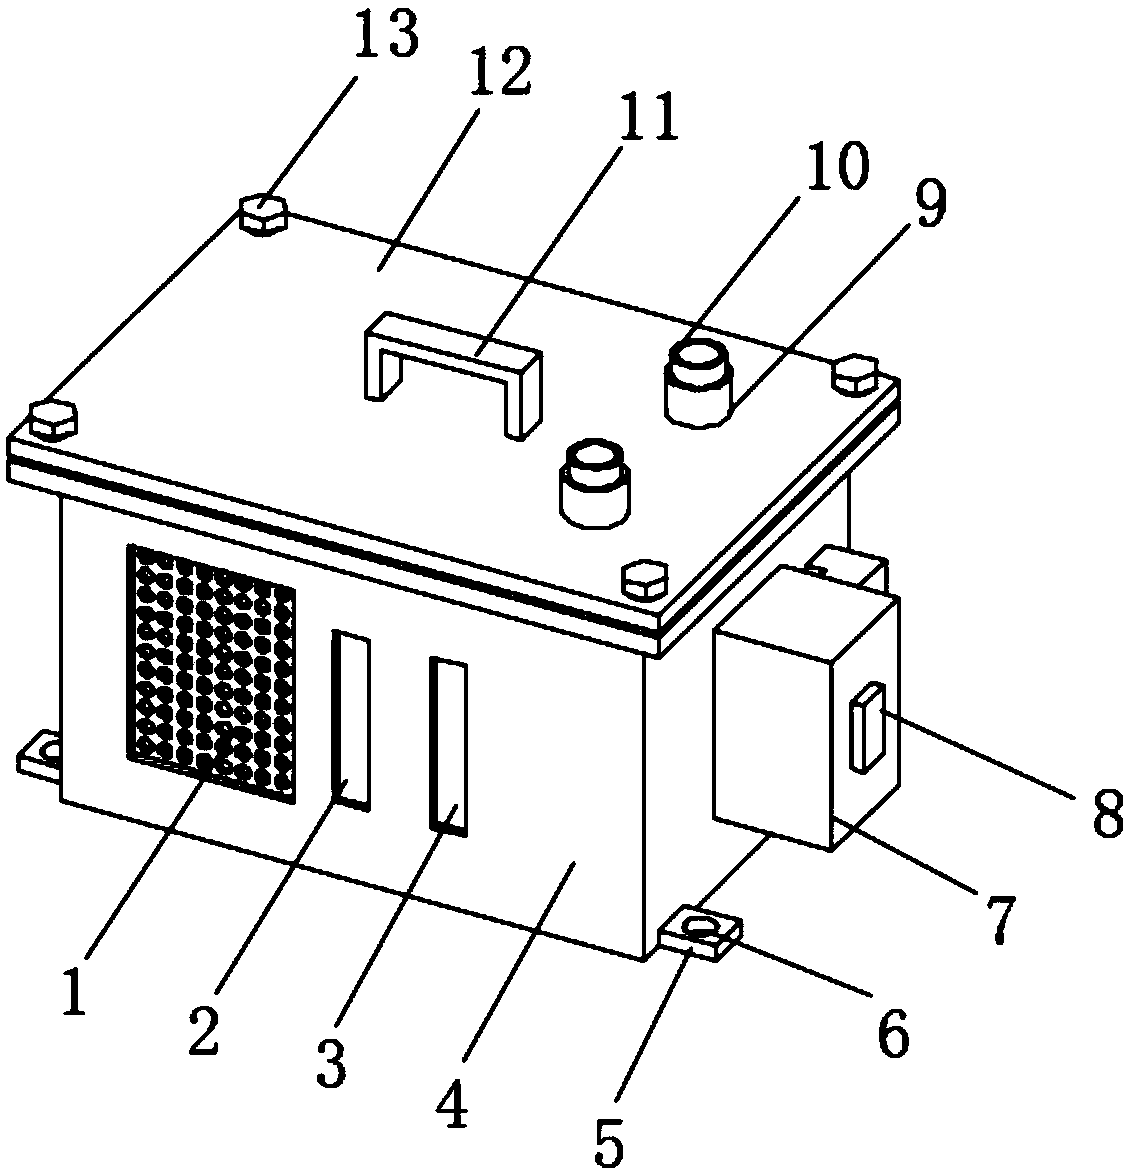 Battery box for new energy electric vehicle